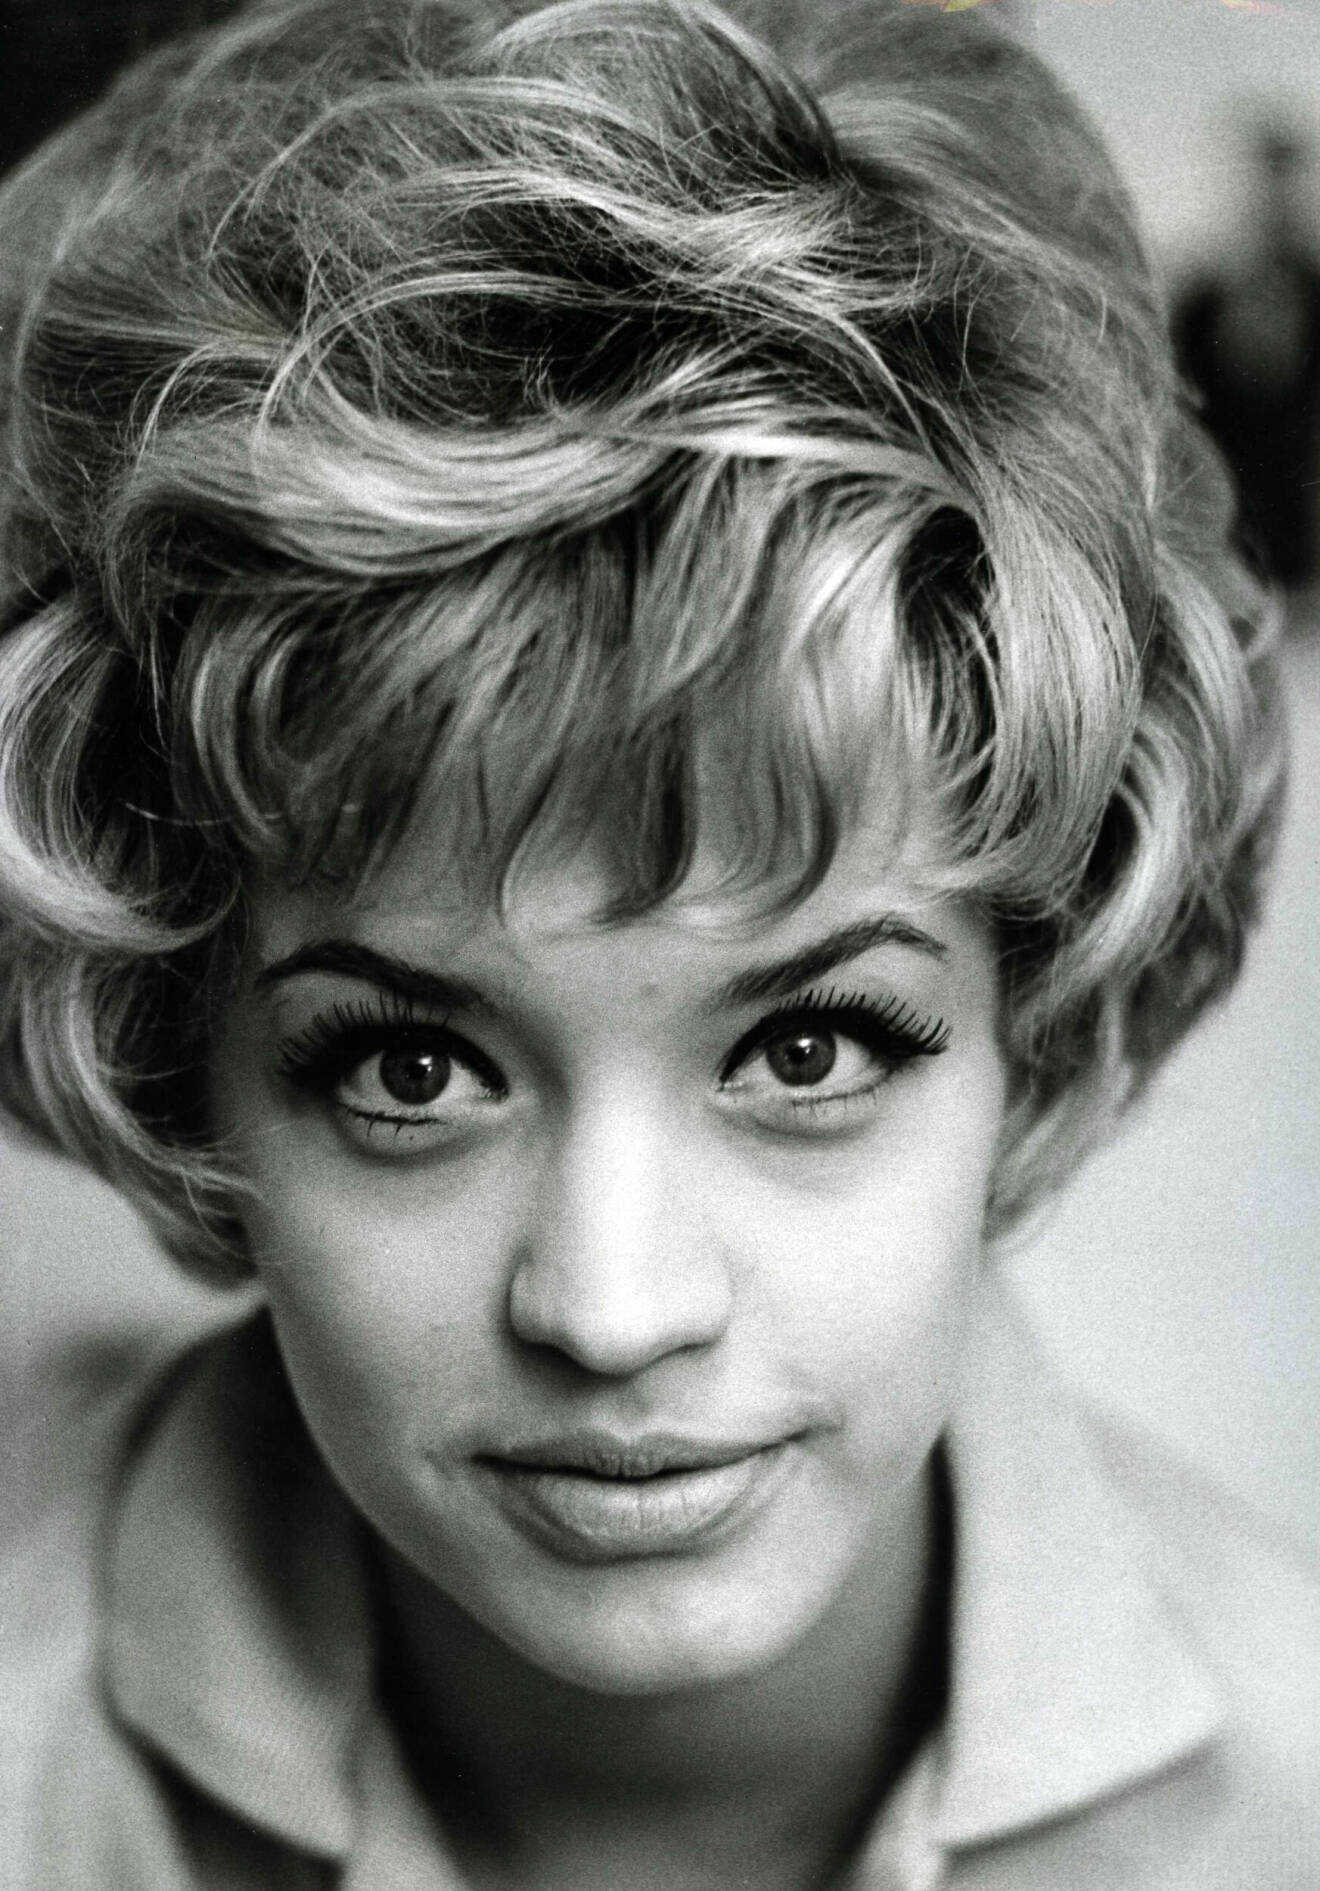 Lill-Babs, 1960